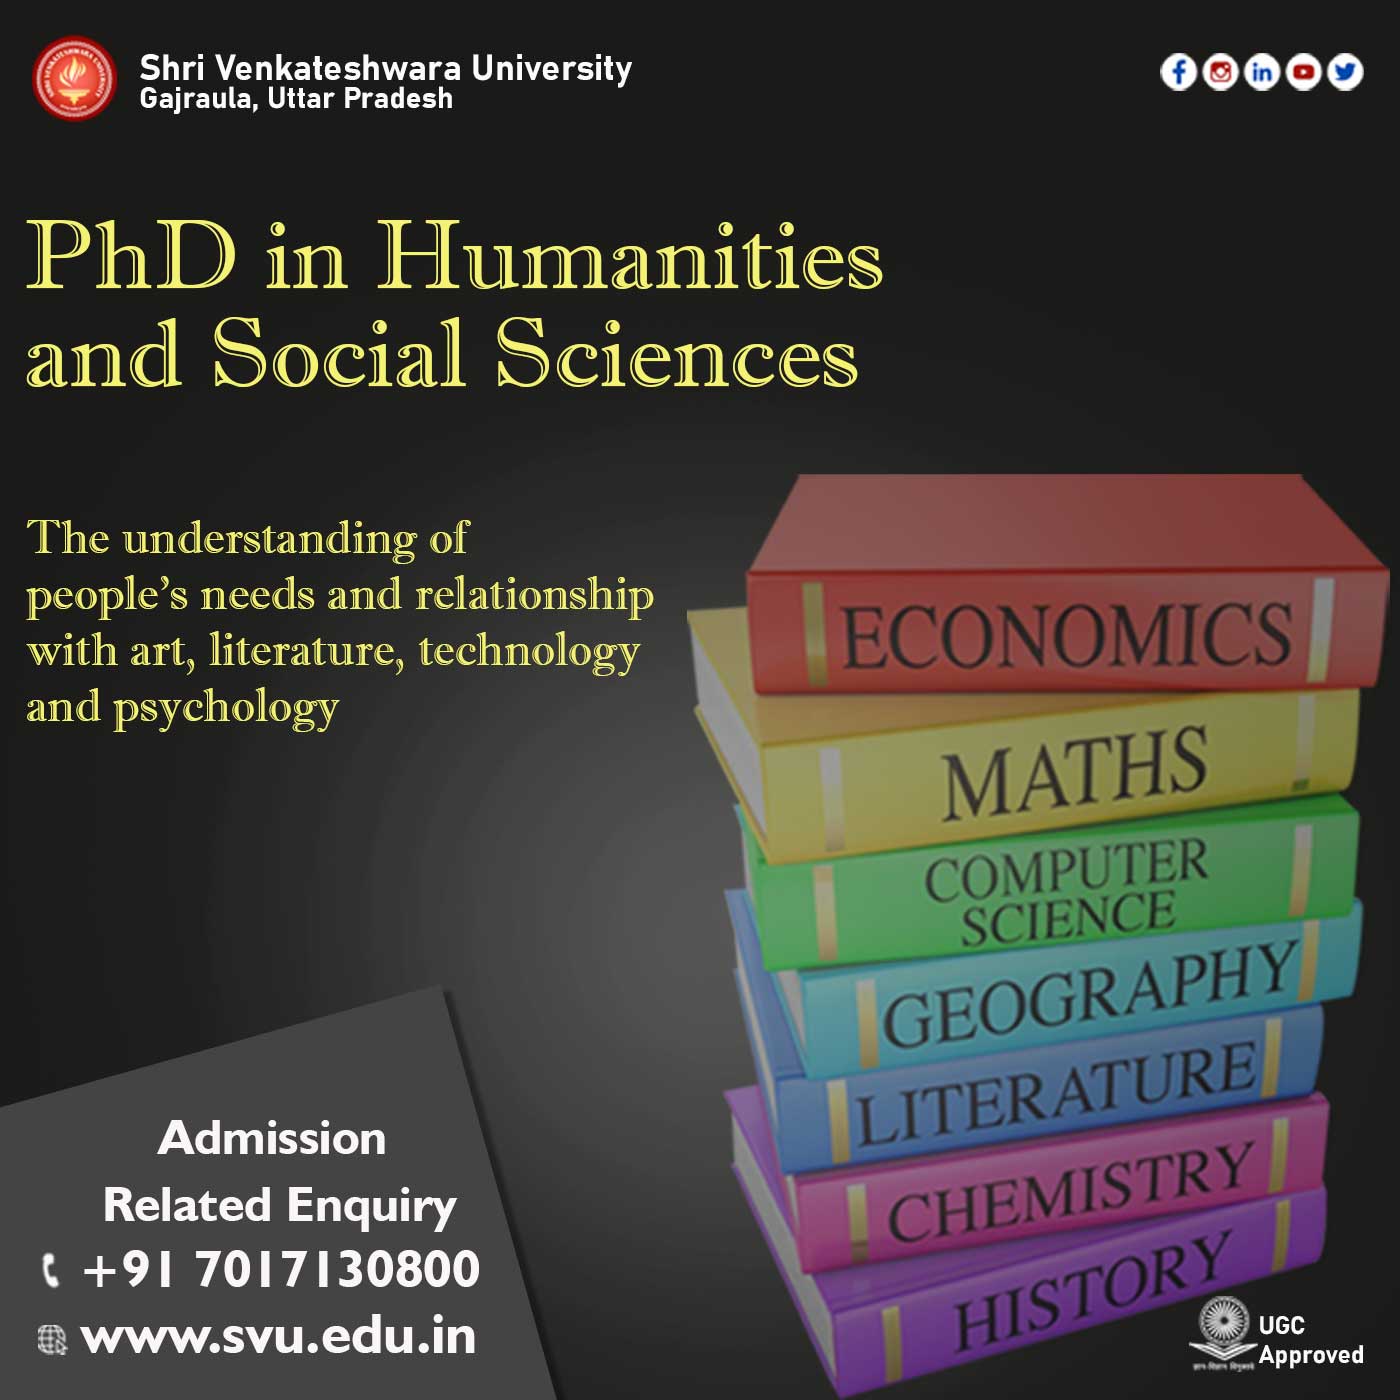 Ph.D Humanities and Social Sciences